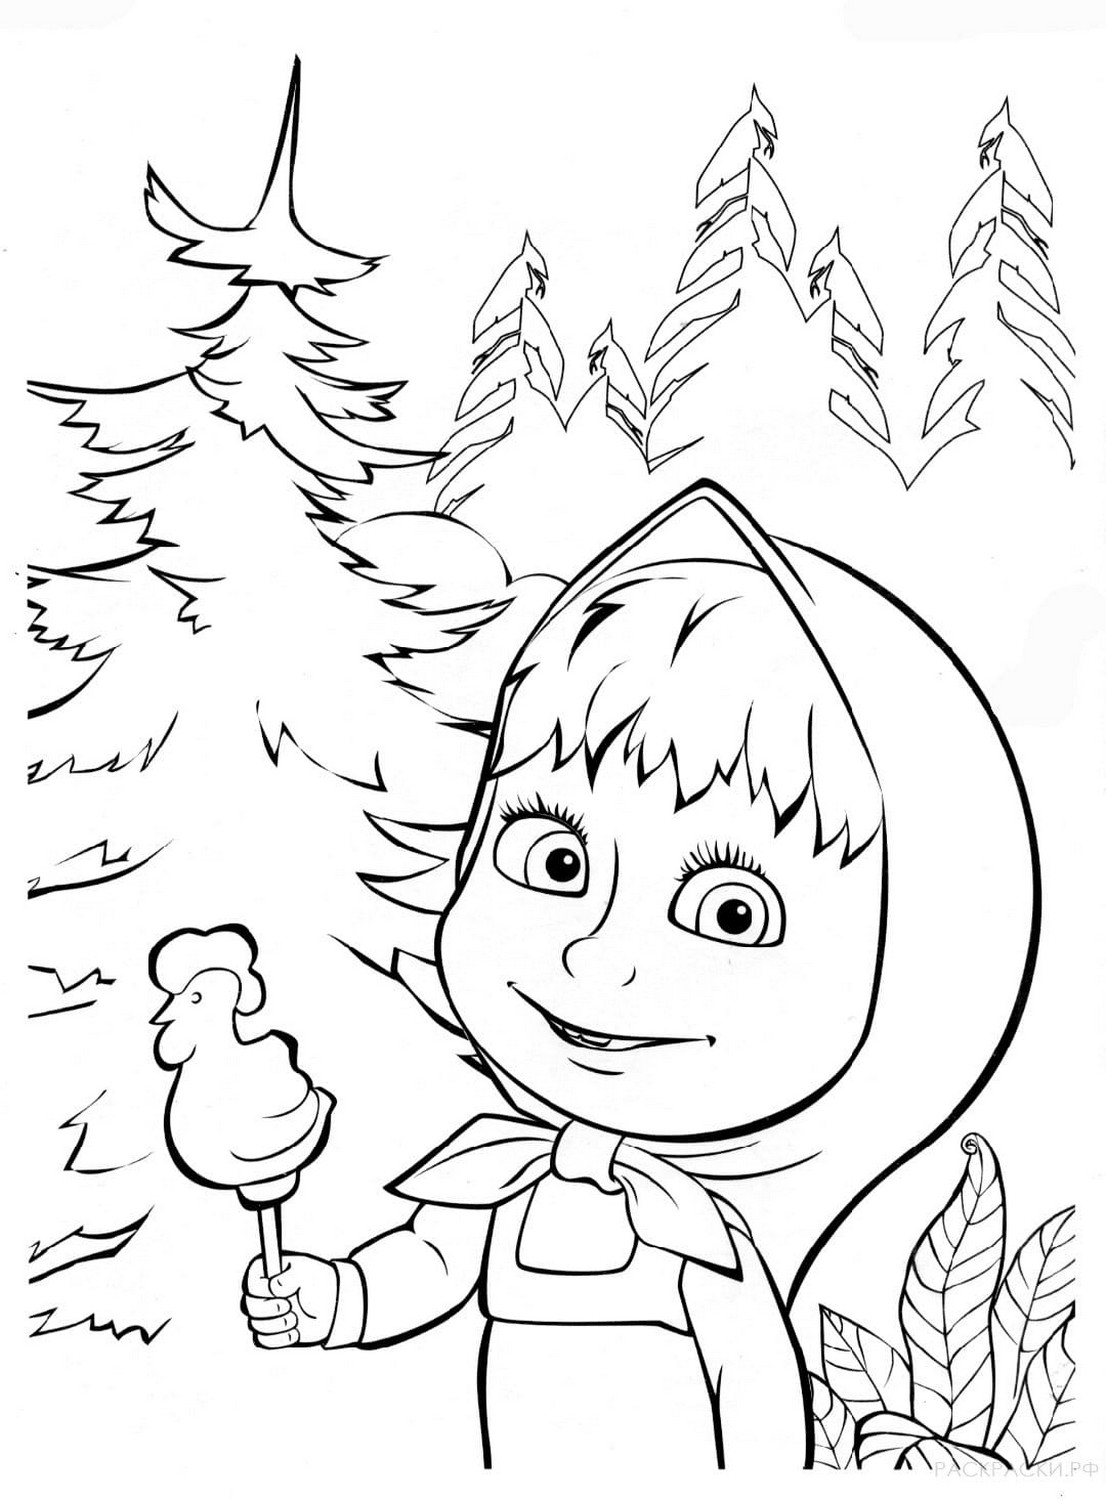 Masha and the Bear 48 drawing from Masha and the Bear to print and color